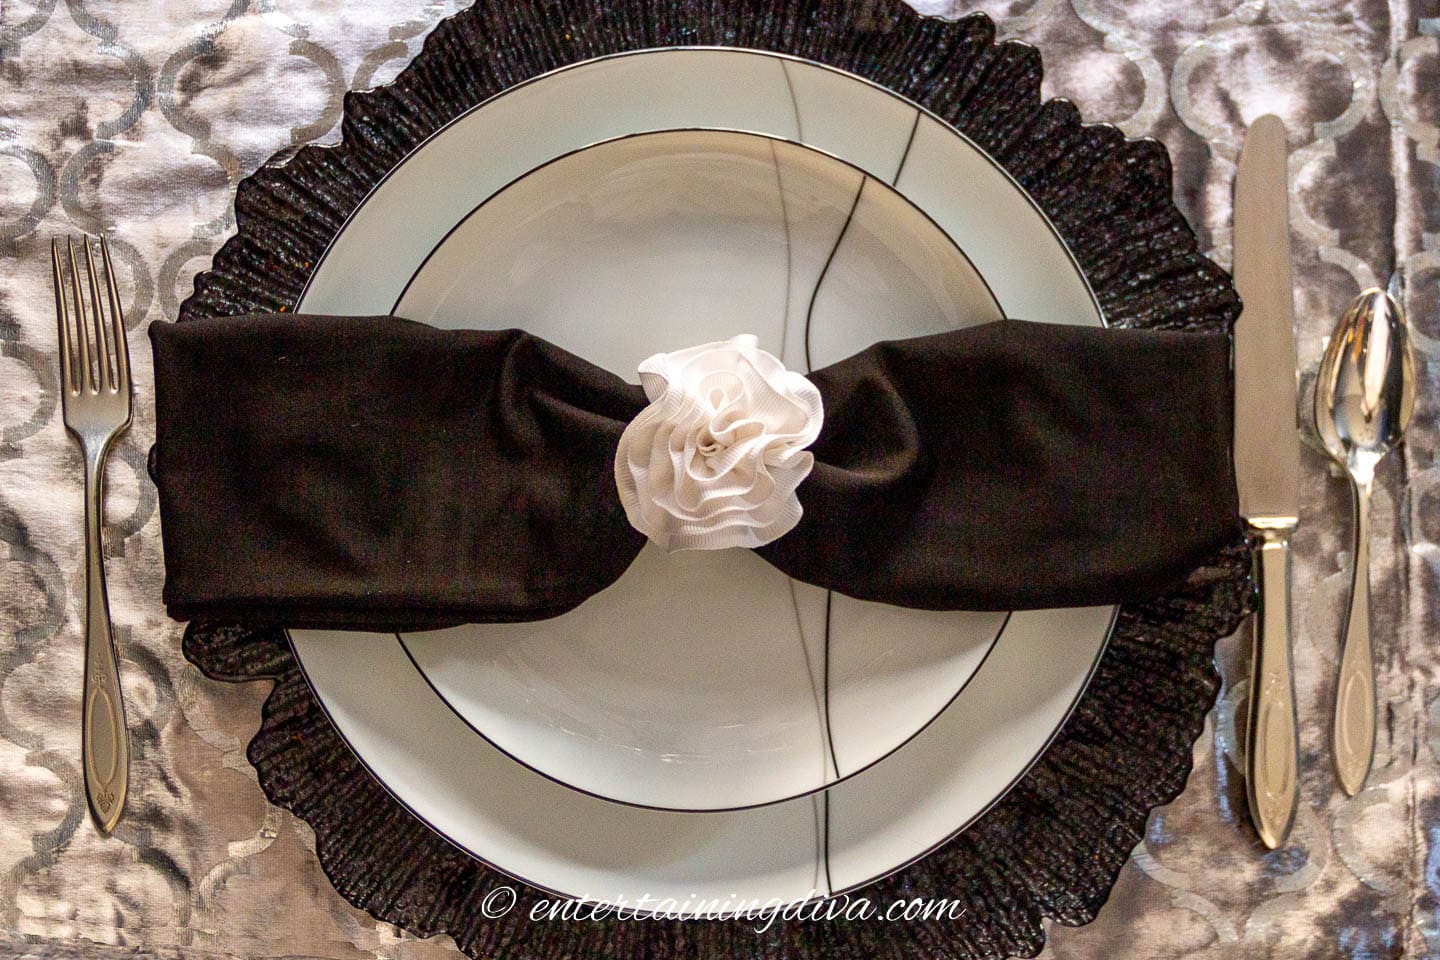 Black and white plates and a black napkin with a white napkin ring on a black charger and silver placemat